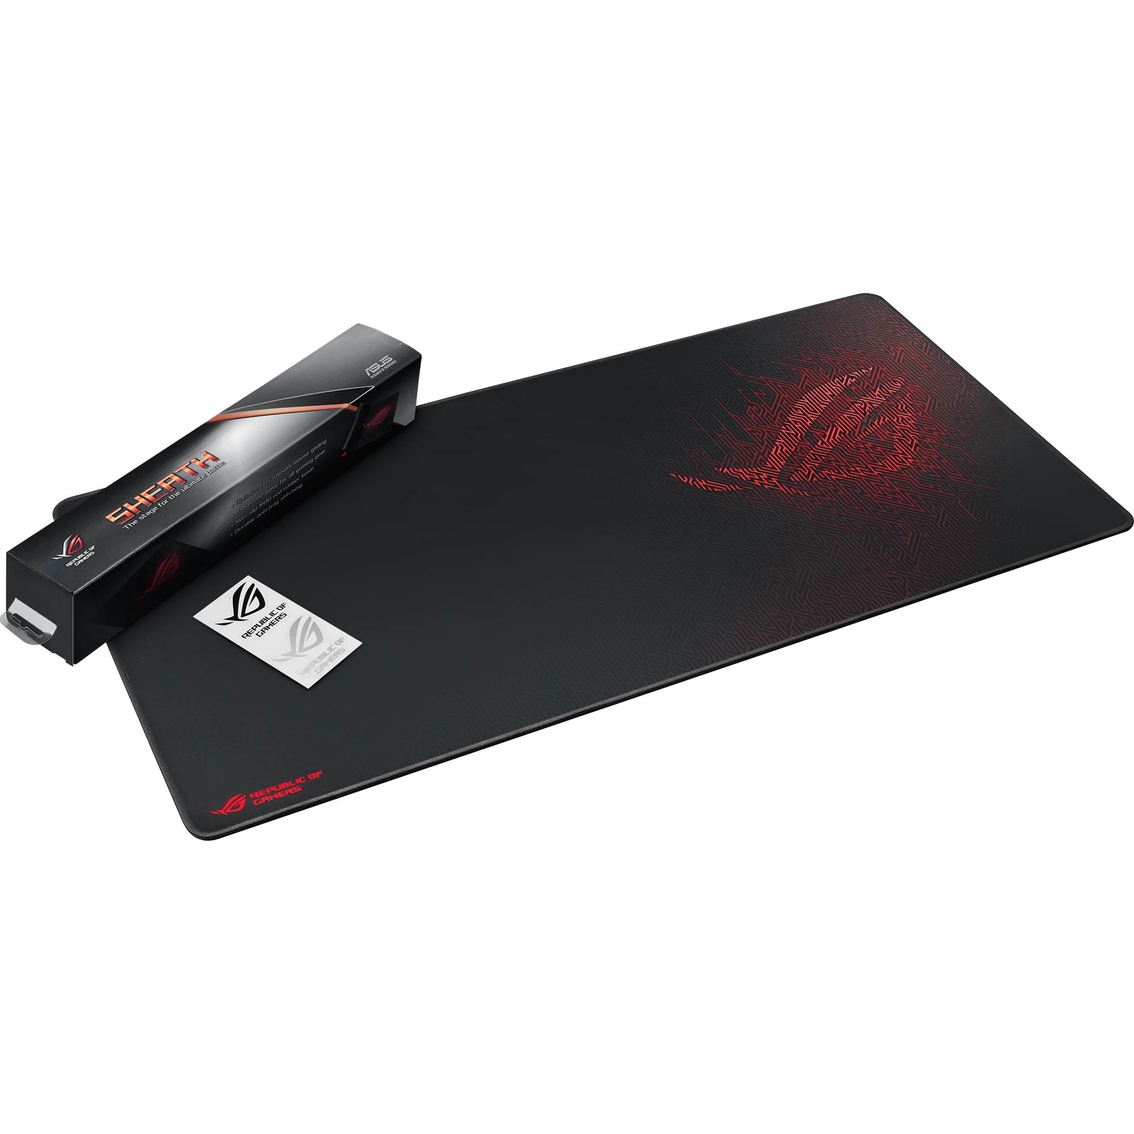 Asus ROG Sheath BLK Limited Edition Extra-Large Gaming Surface Mouse Pad - Image 5 of 9